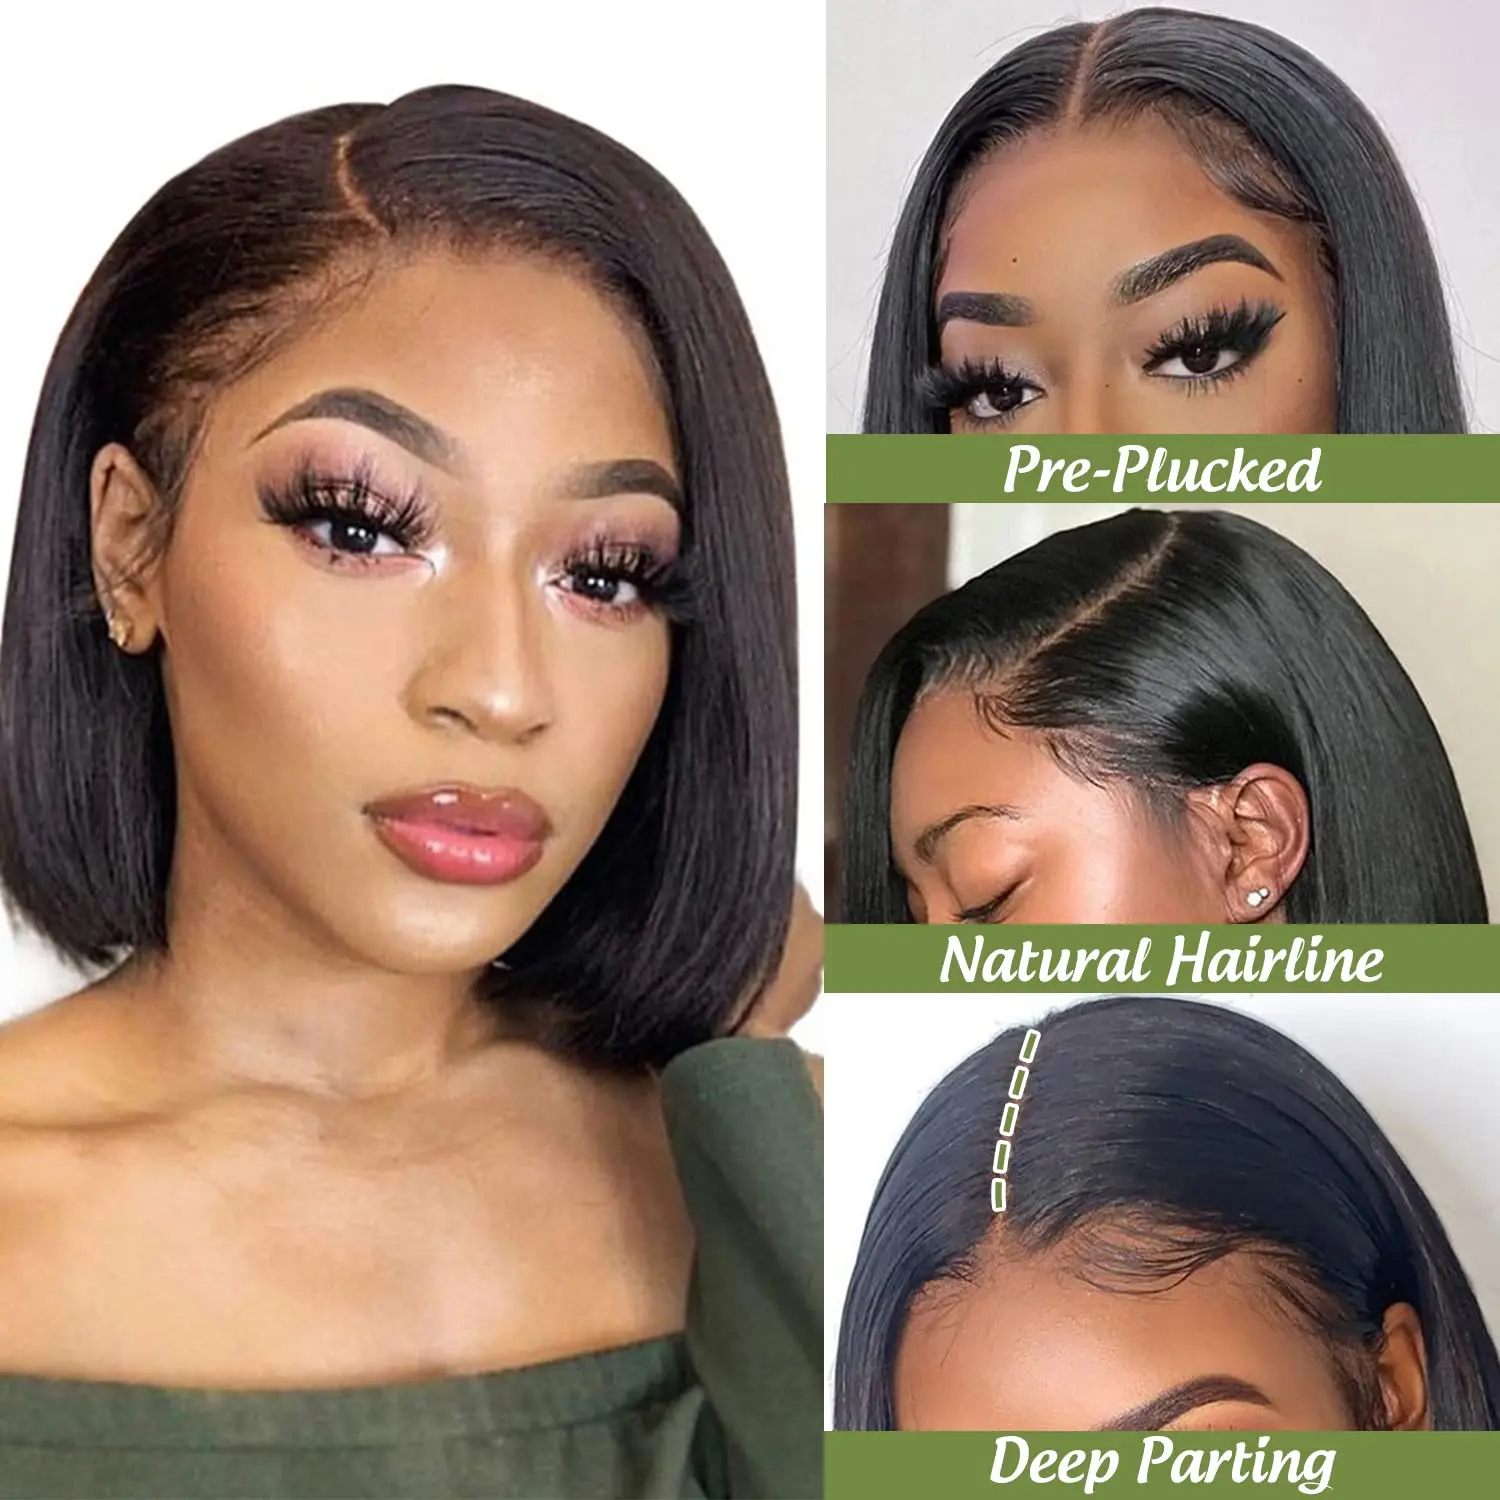 

Suttie Glueless Lace Front Human Hair Wigs Short Straight Bob Wig 4x4 Closure Wig Indian 13x4 Lace Frontal Wigs For Women